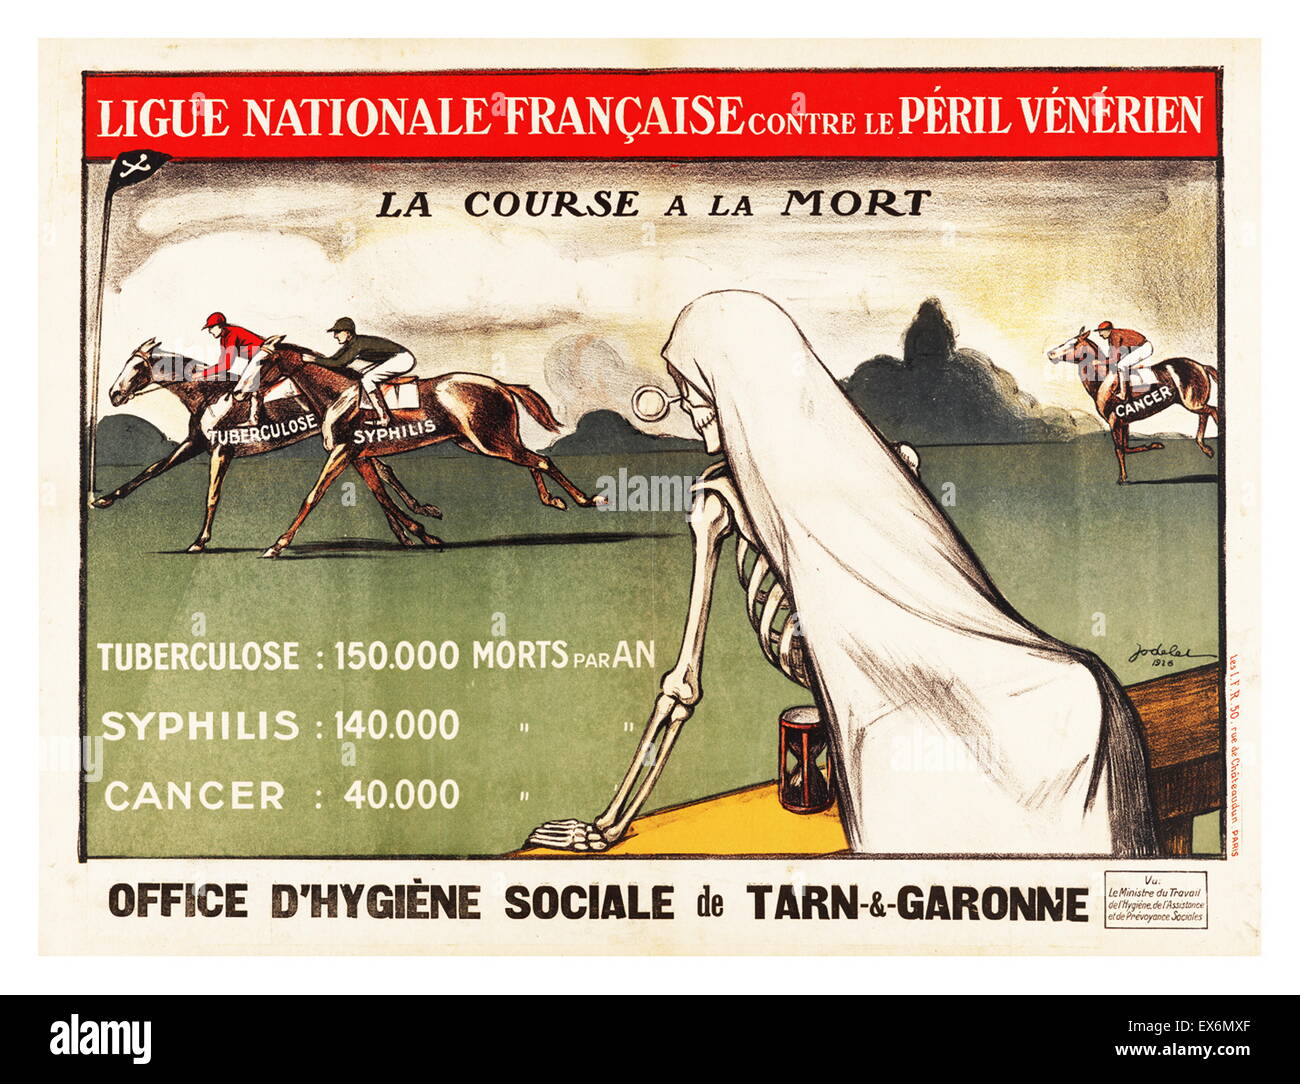 Ligue Nationale Française contre le Peril Vénérién, France, ca. 1926. Death watches a thoroughbred race of deadly diseases. The statistics below compare the annual mortality rates of tuberculosis, syphilis and cancer Stock Photo